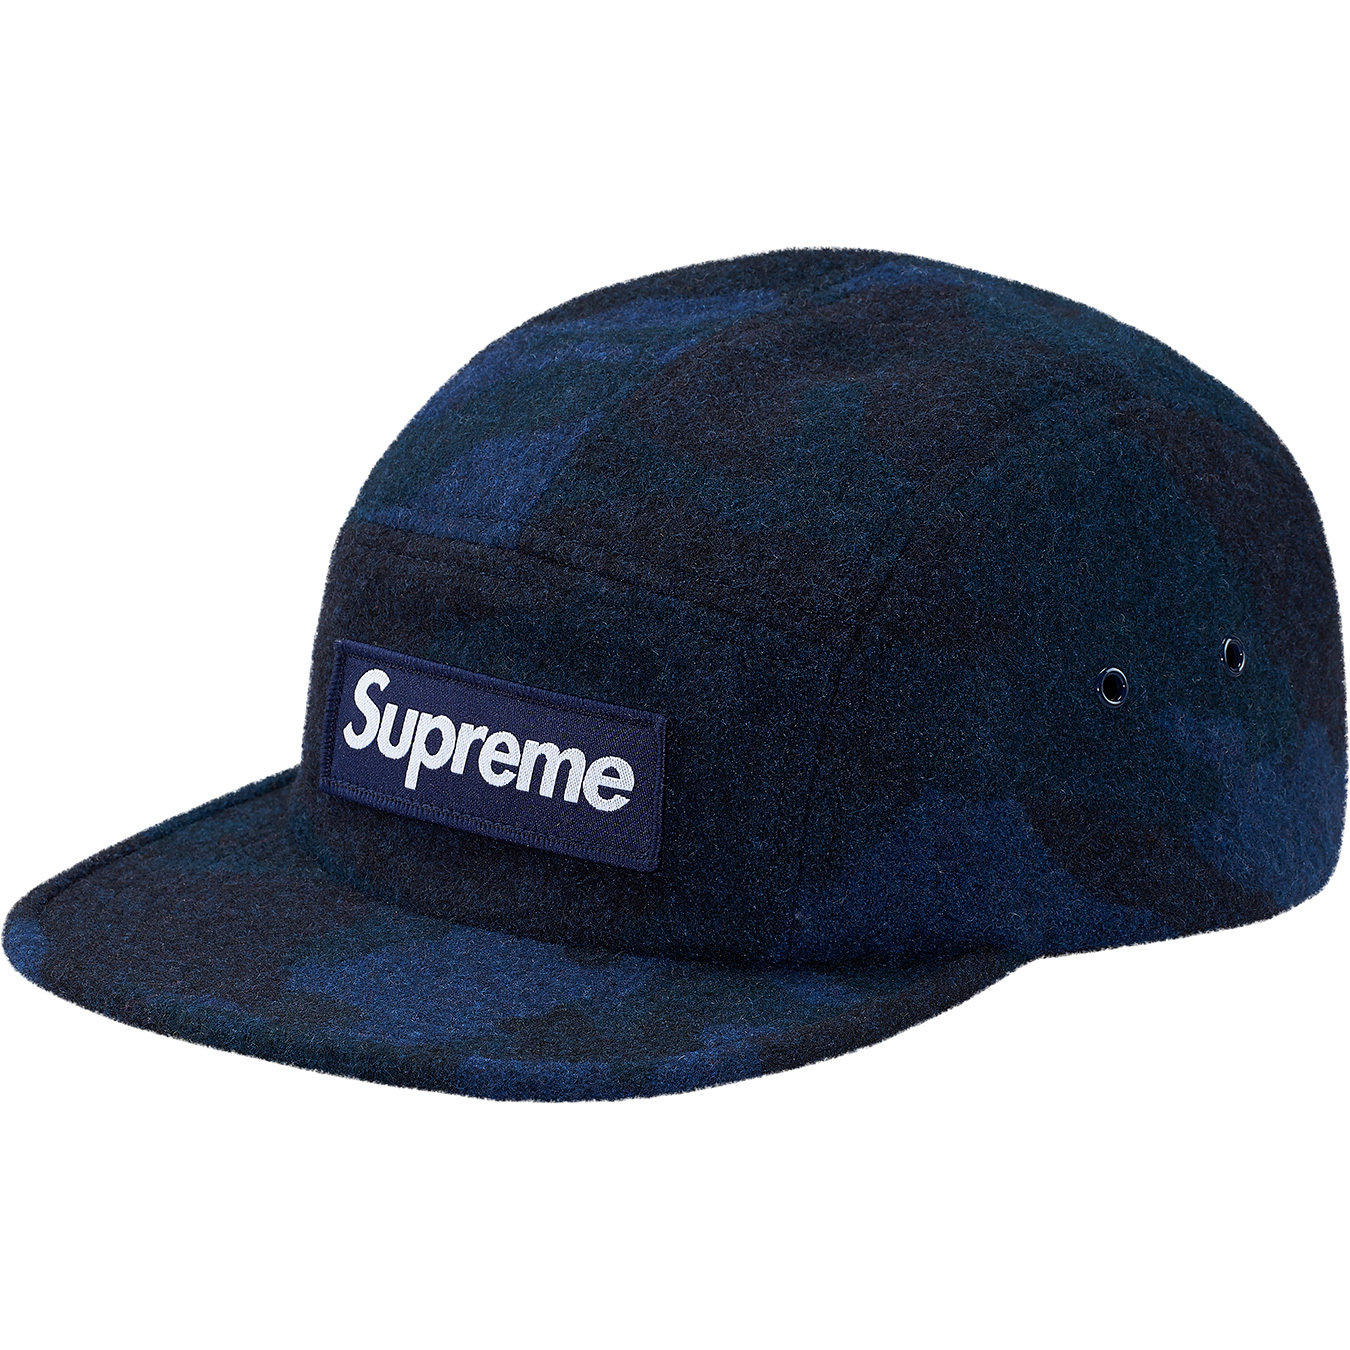 SUPREME Boucle Houndstooth Camp Cap Neon Navy box logo tnf F/W 17 